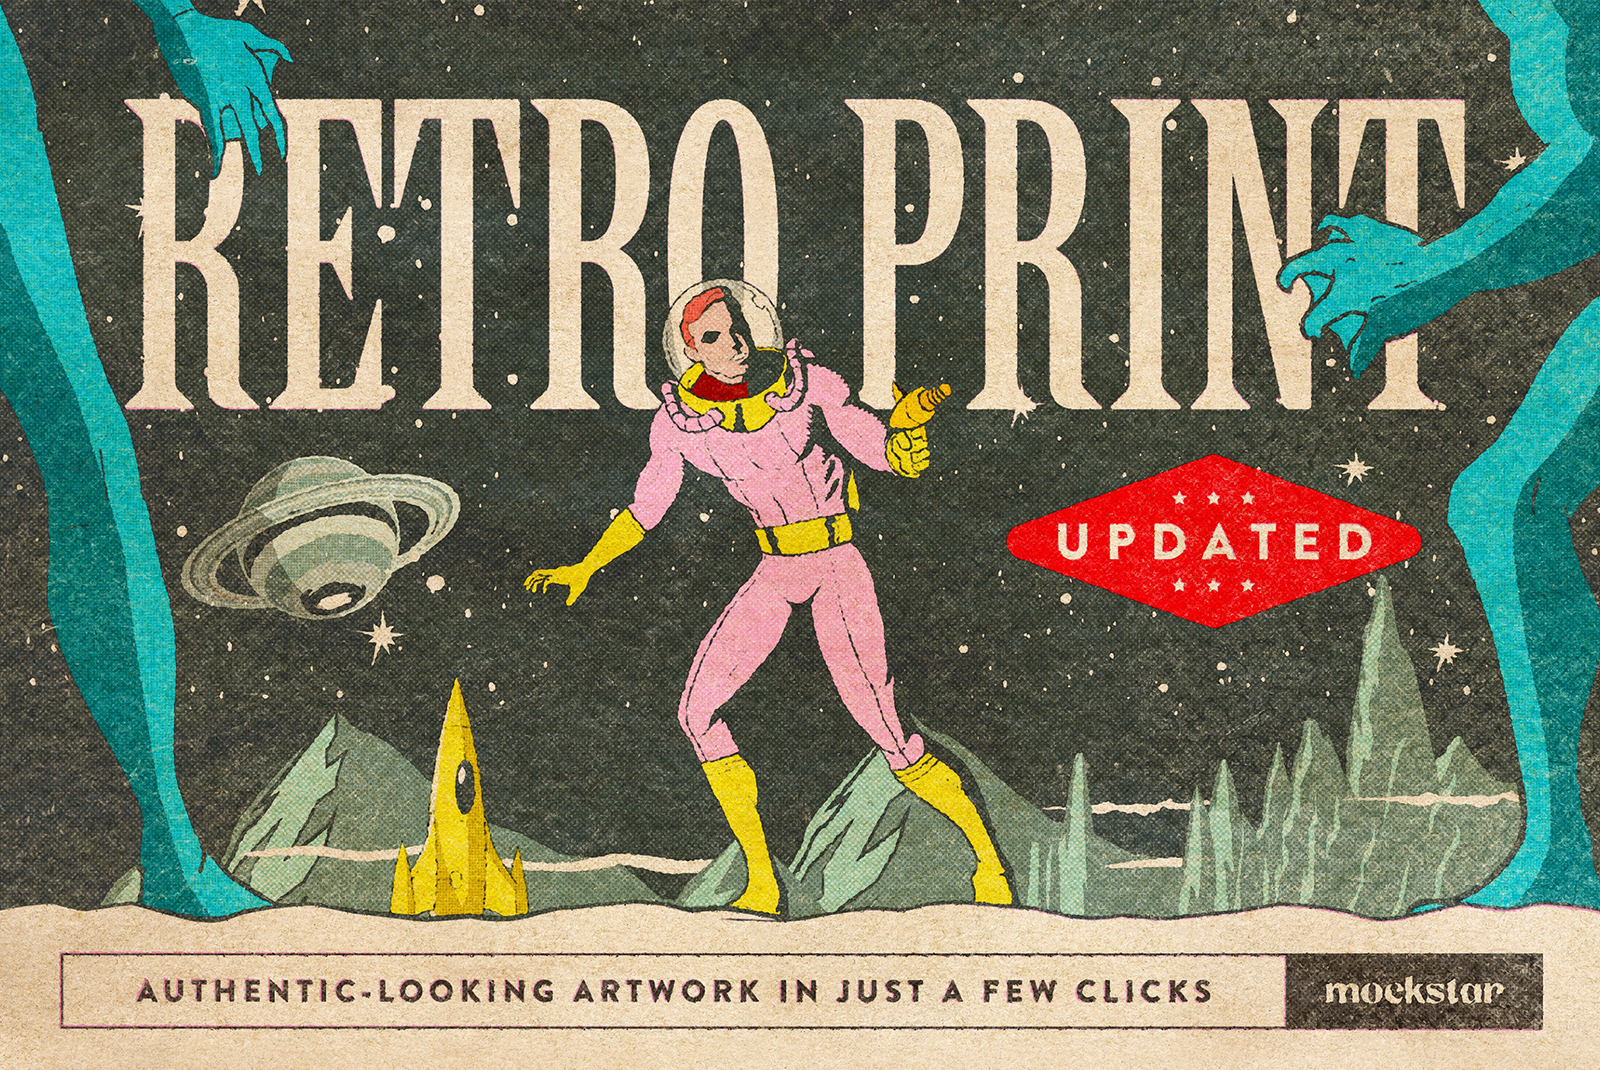 Vintage space-themed graphic template with astronaut and alien, textured retro print effect, ideal for posters and t-shirts.